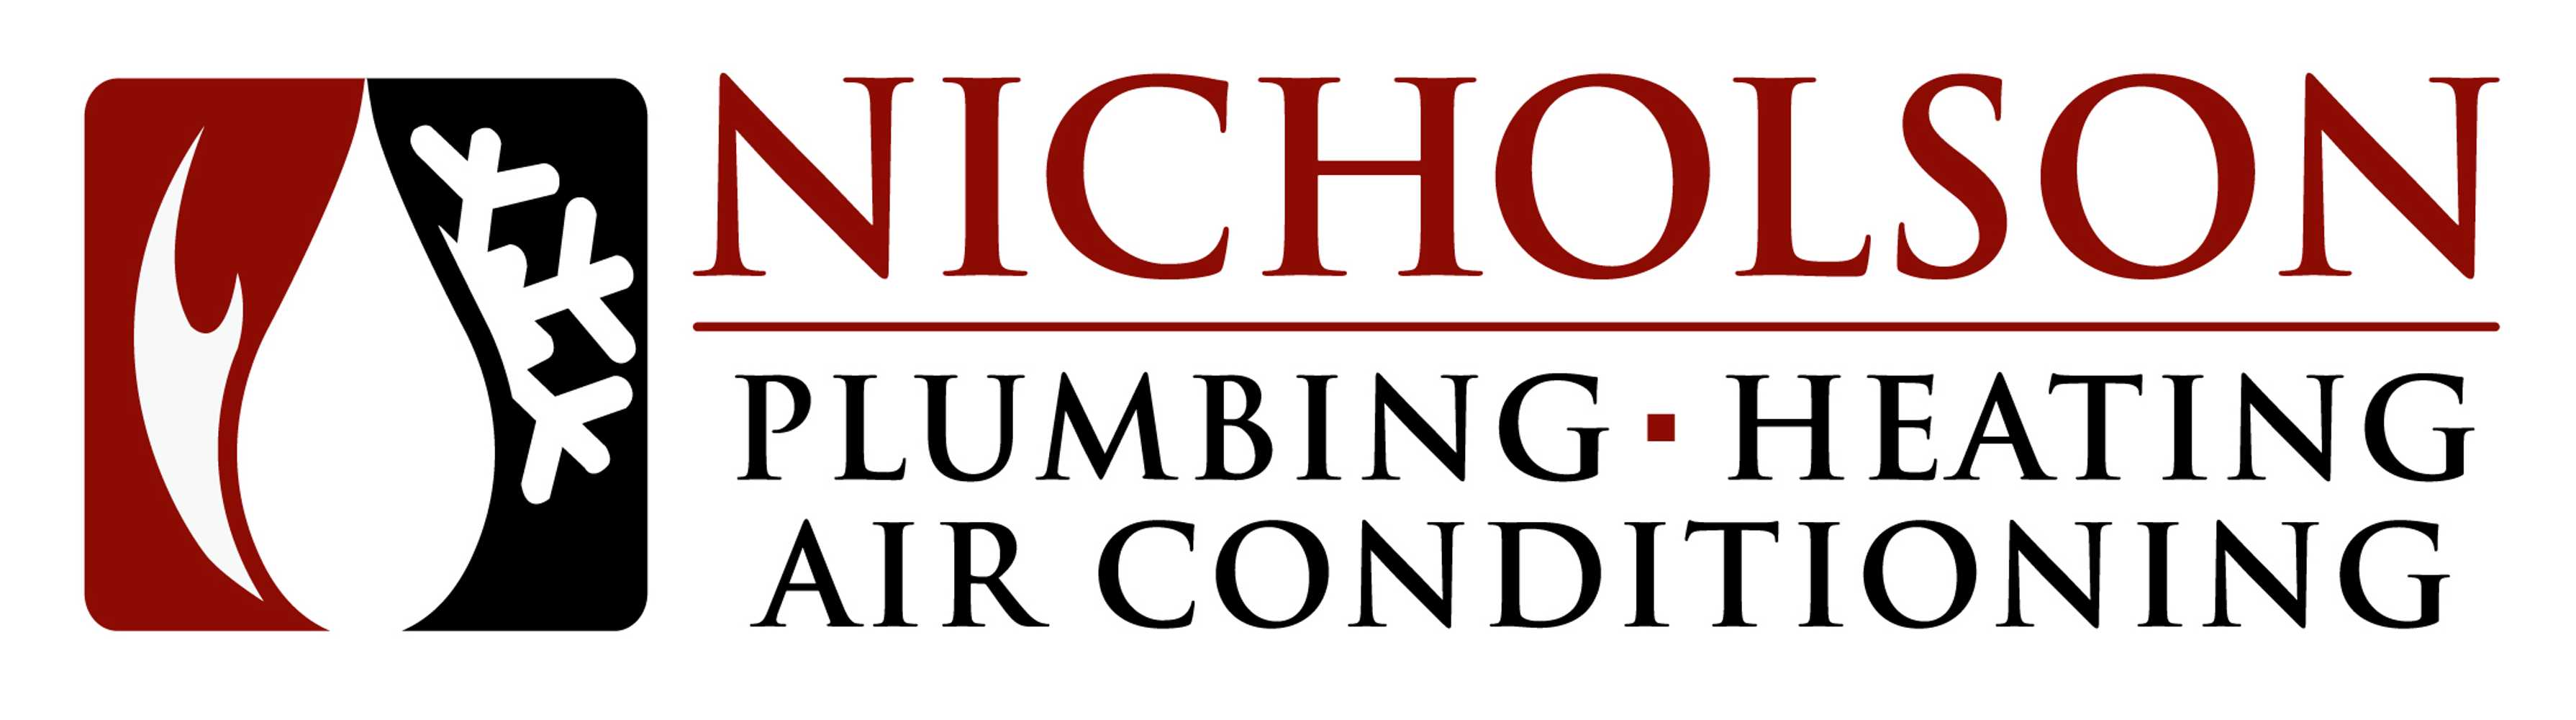 Nicholson Plumbing, Heating & Air Conditioning Project 1